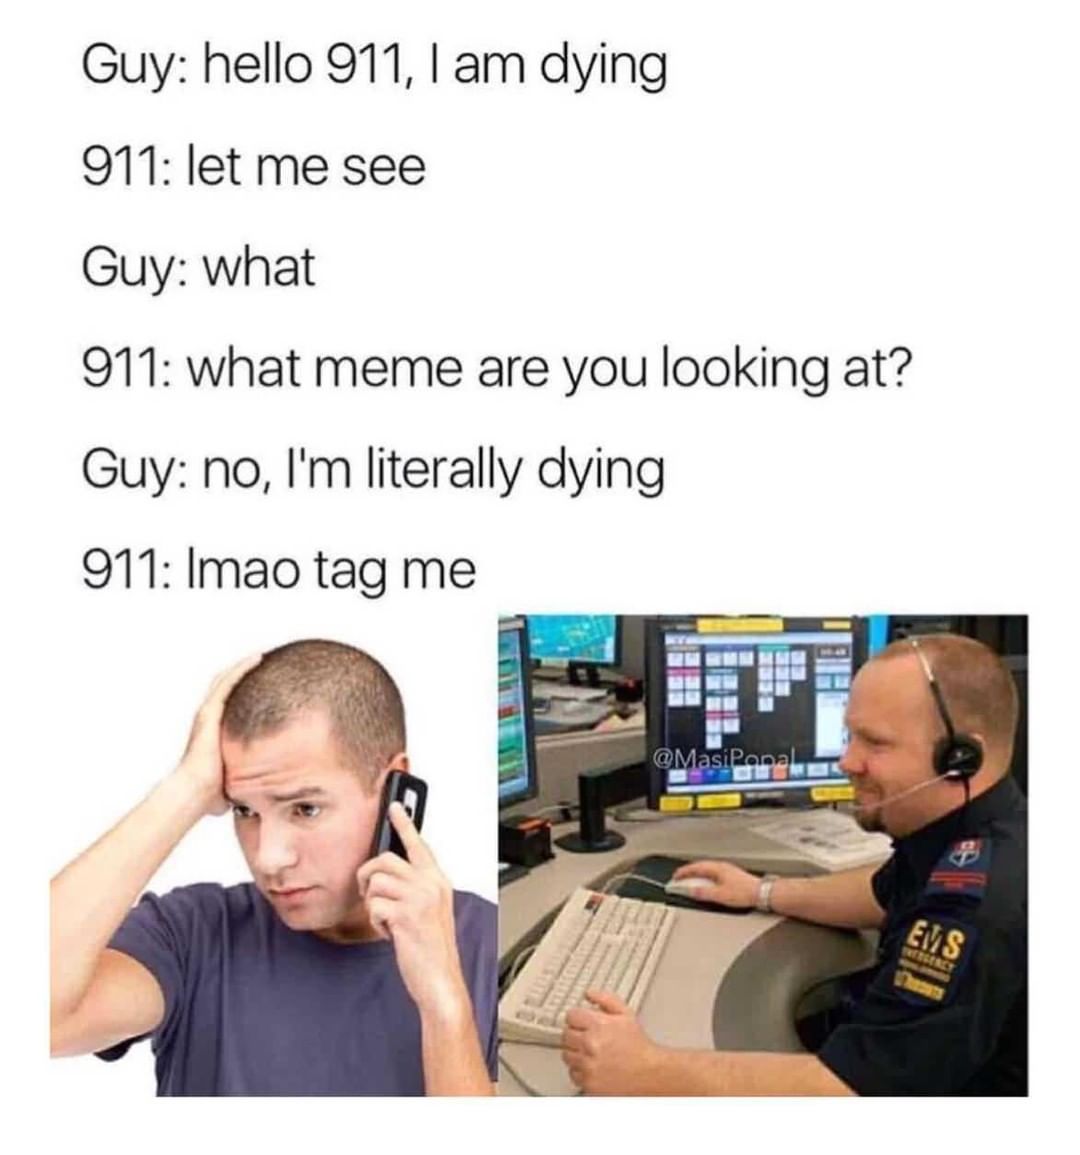 Guy: Hello 911, I am dying. 911: Let me see. Guy: What. 911: what meme are you looking at? Guy: No, 11m literally dying. 911: Imao tag me.